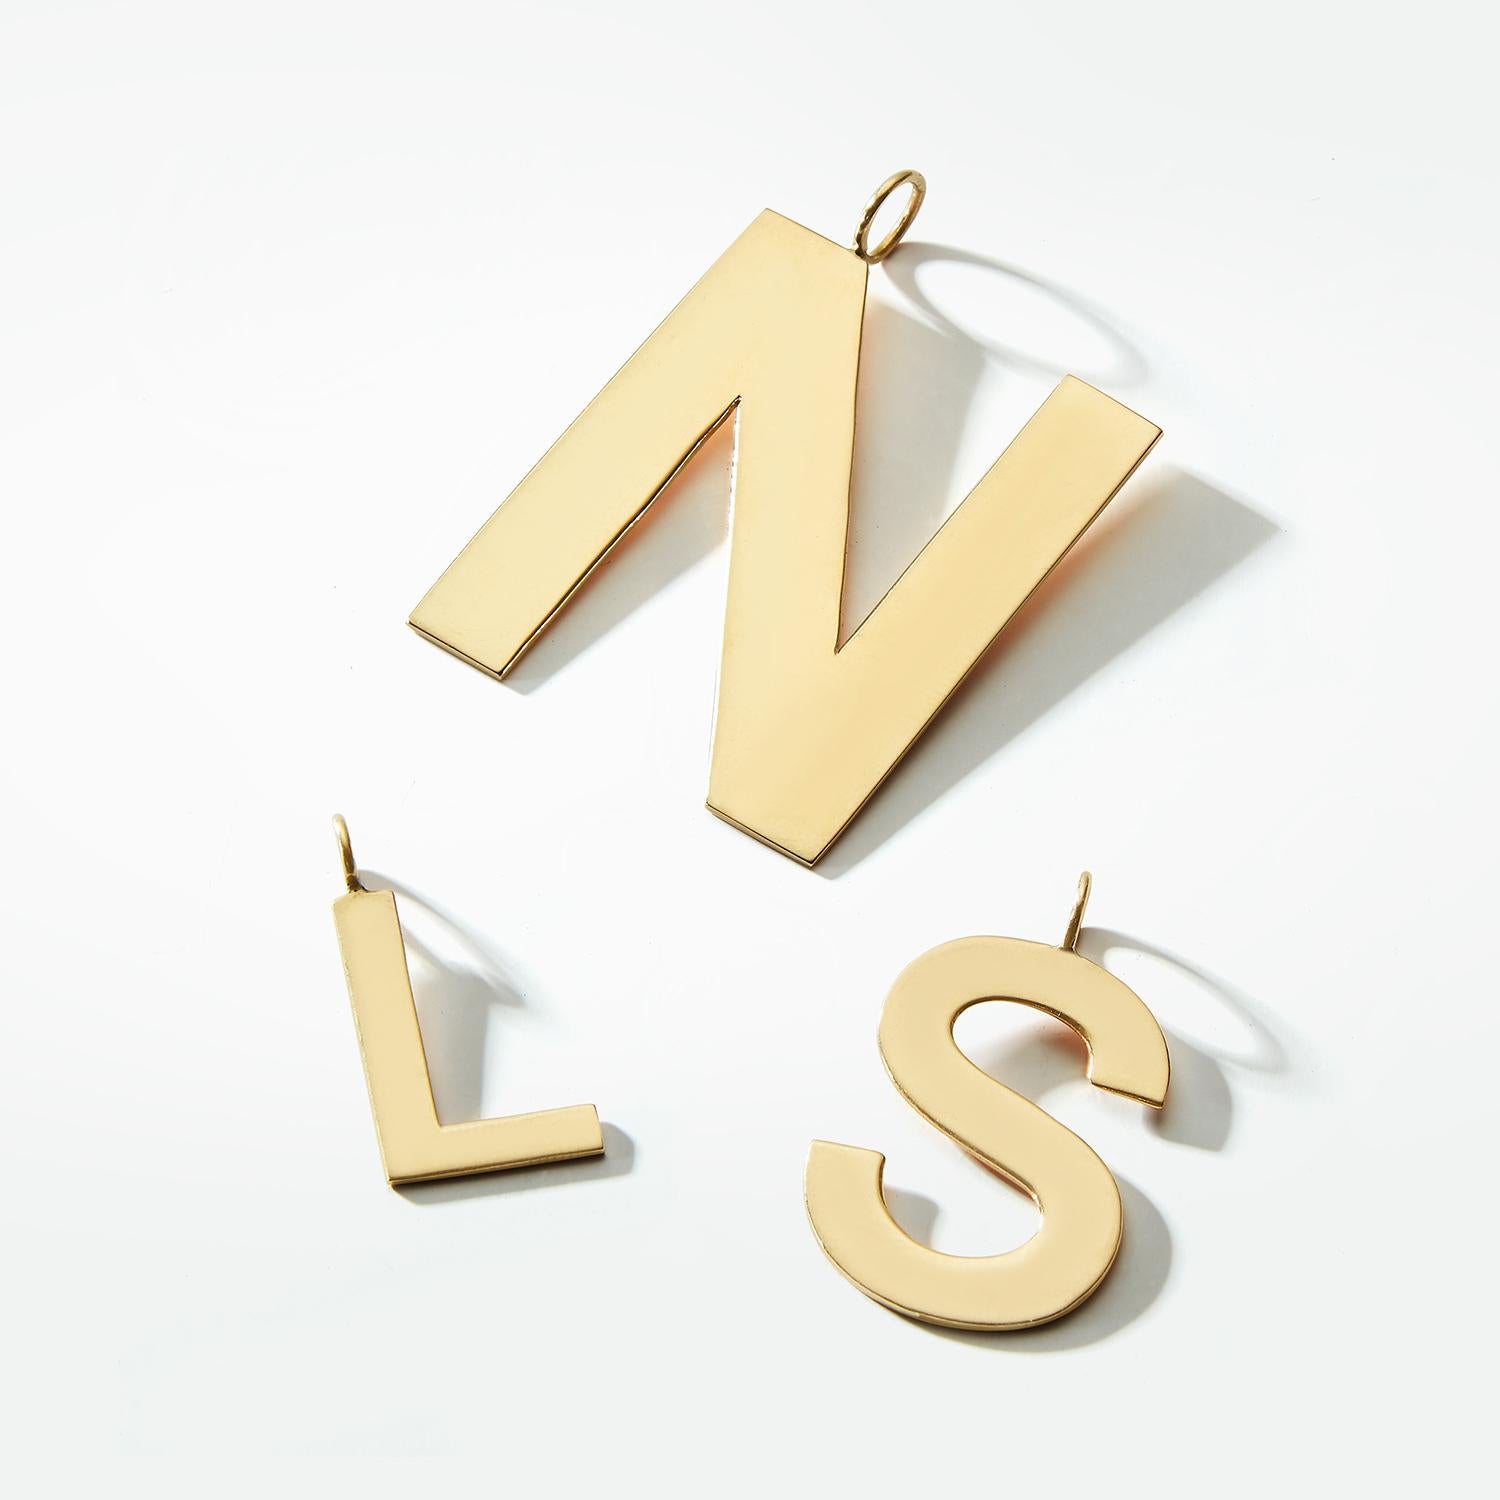 Our Small Initial Charm Medallions make a big impact. Each block, solid gold letter is meticulously custom made by hand. They are available in every capital letter of the alphabet or single number. We love them for their dynamic look in an